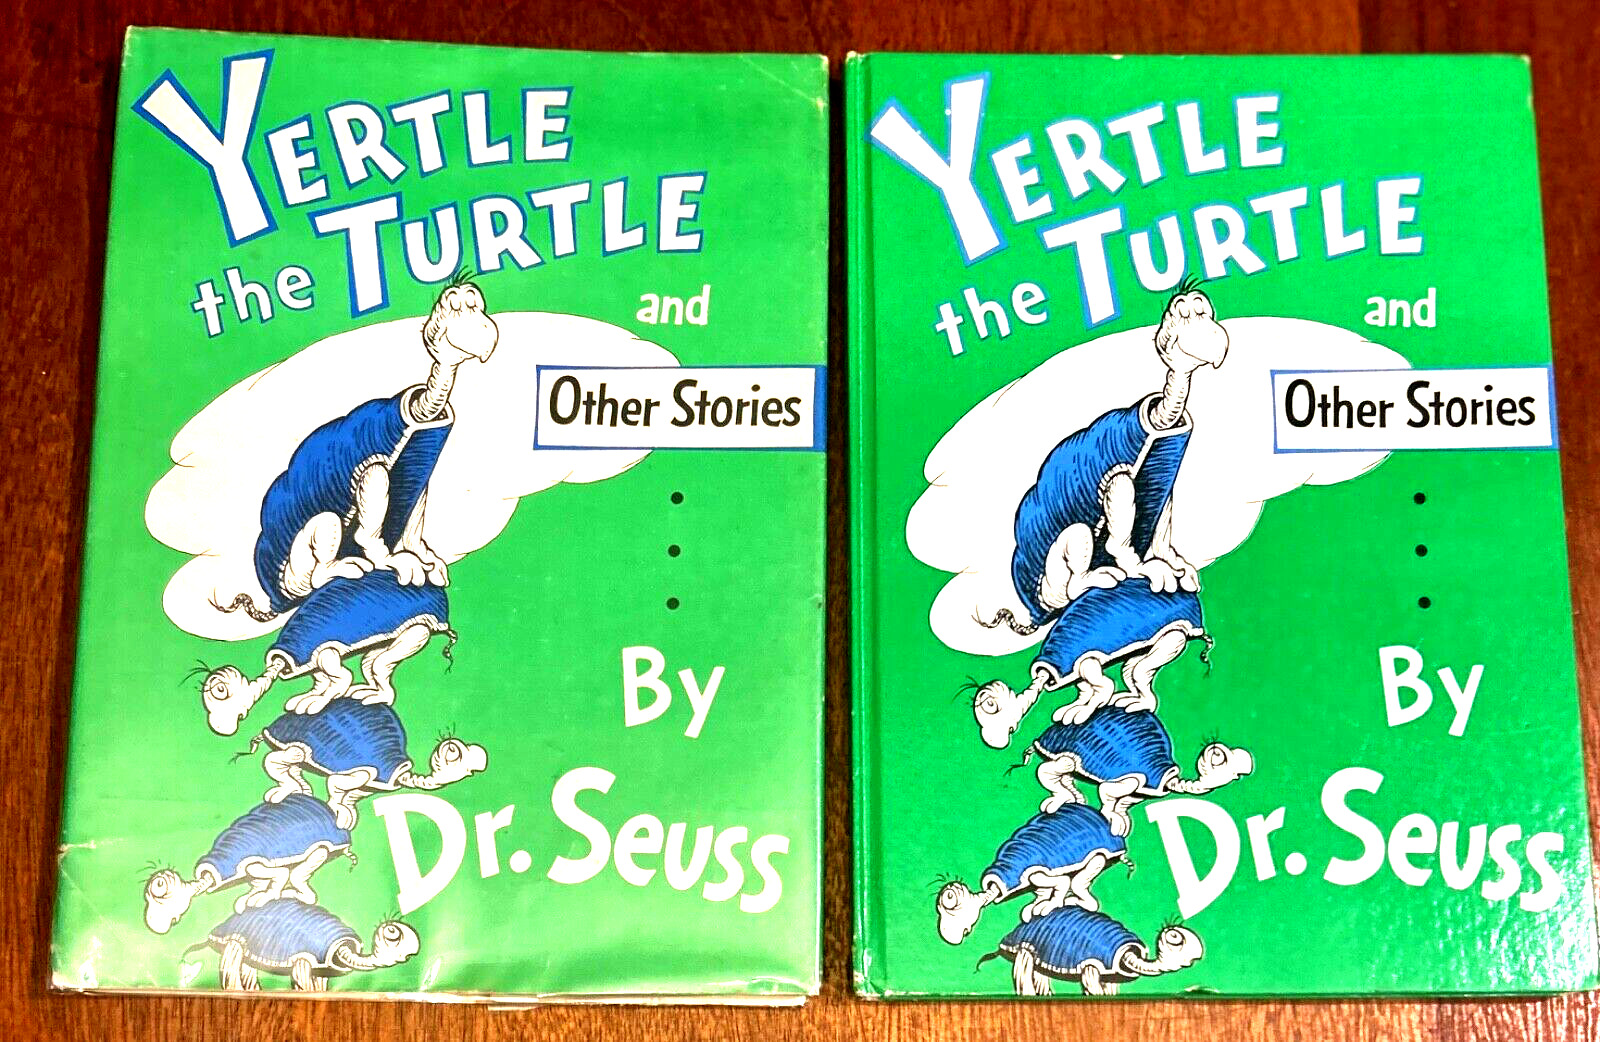 Yertle the Turtle and Other Stories by Dr. Seuss 1st Edition 